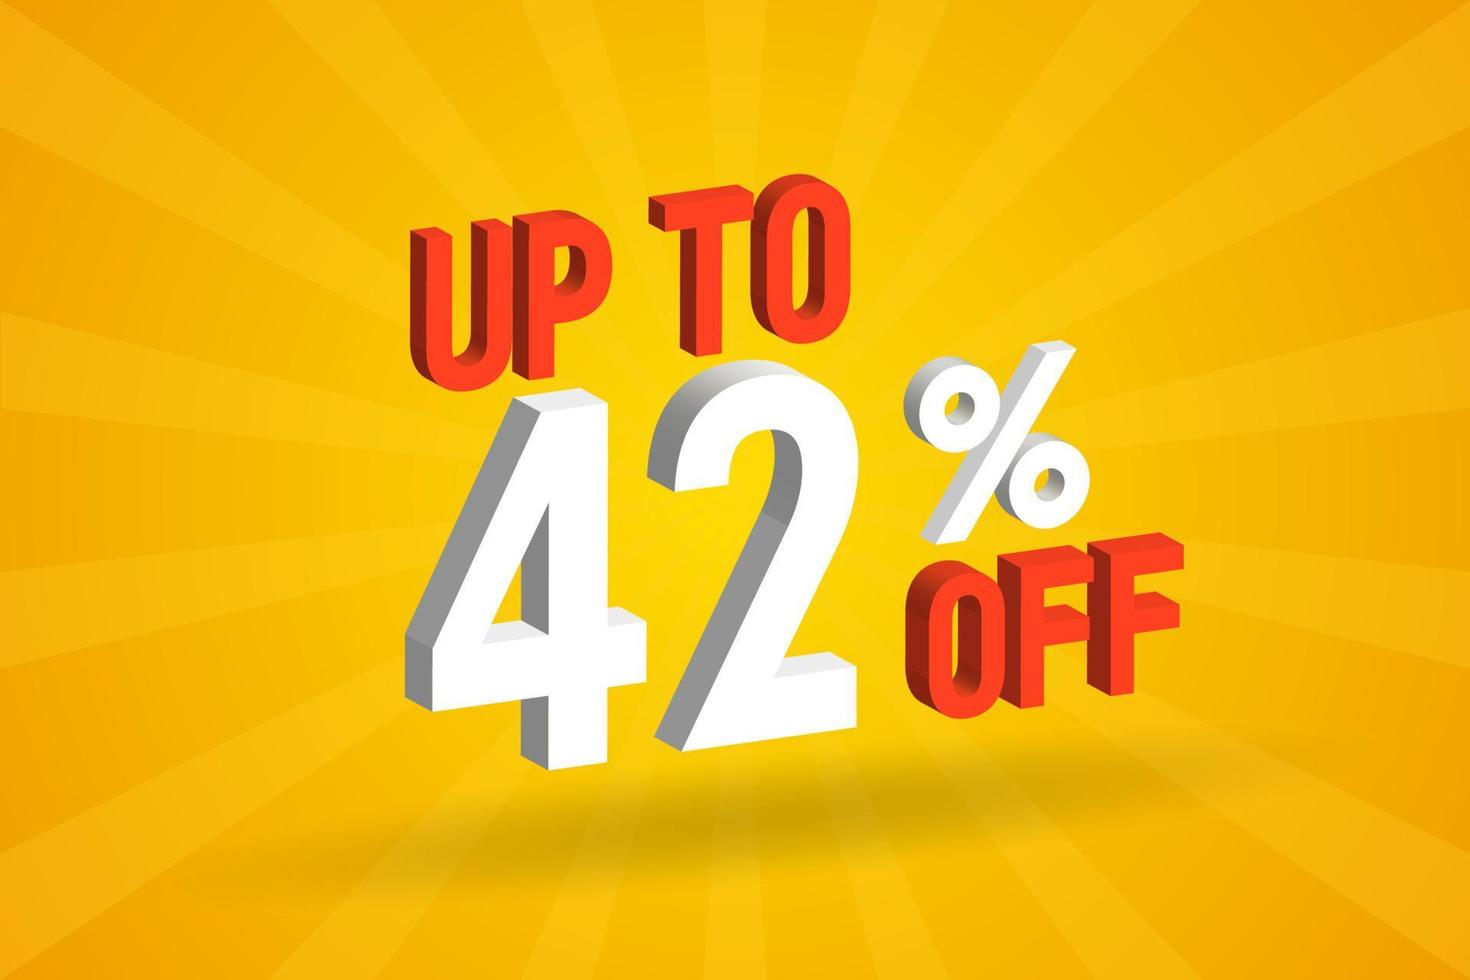 Up To 42 Percent off 3D Special promotional campaign design. Upto 42 of 3D Discount Offer for Sale and marketing. vector